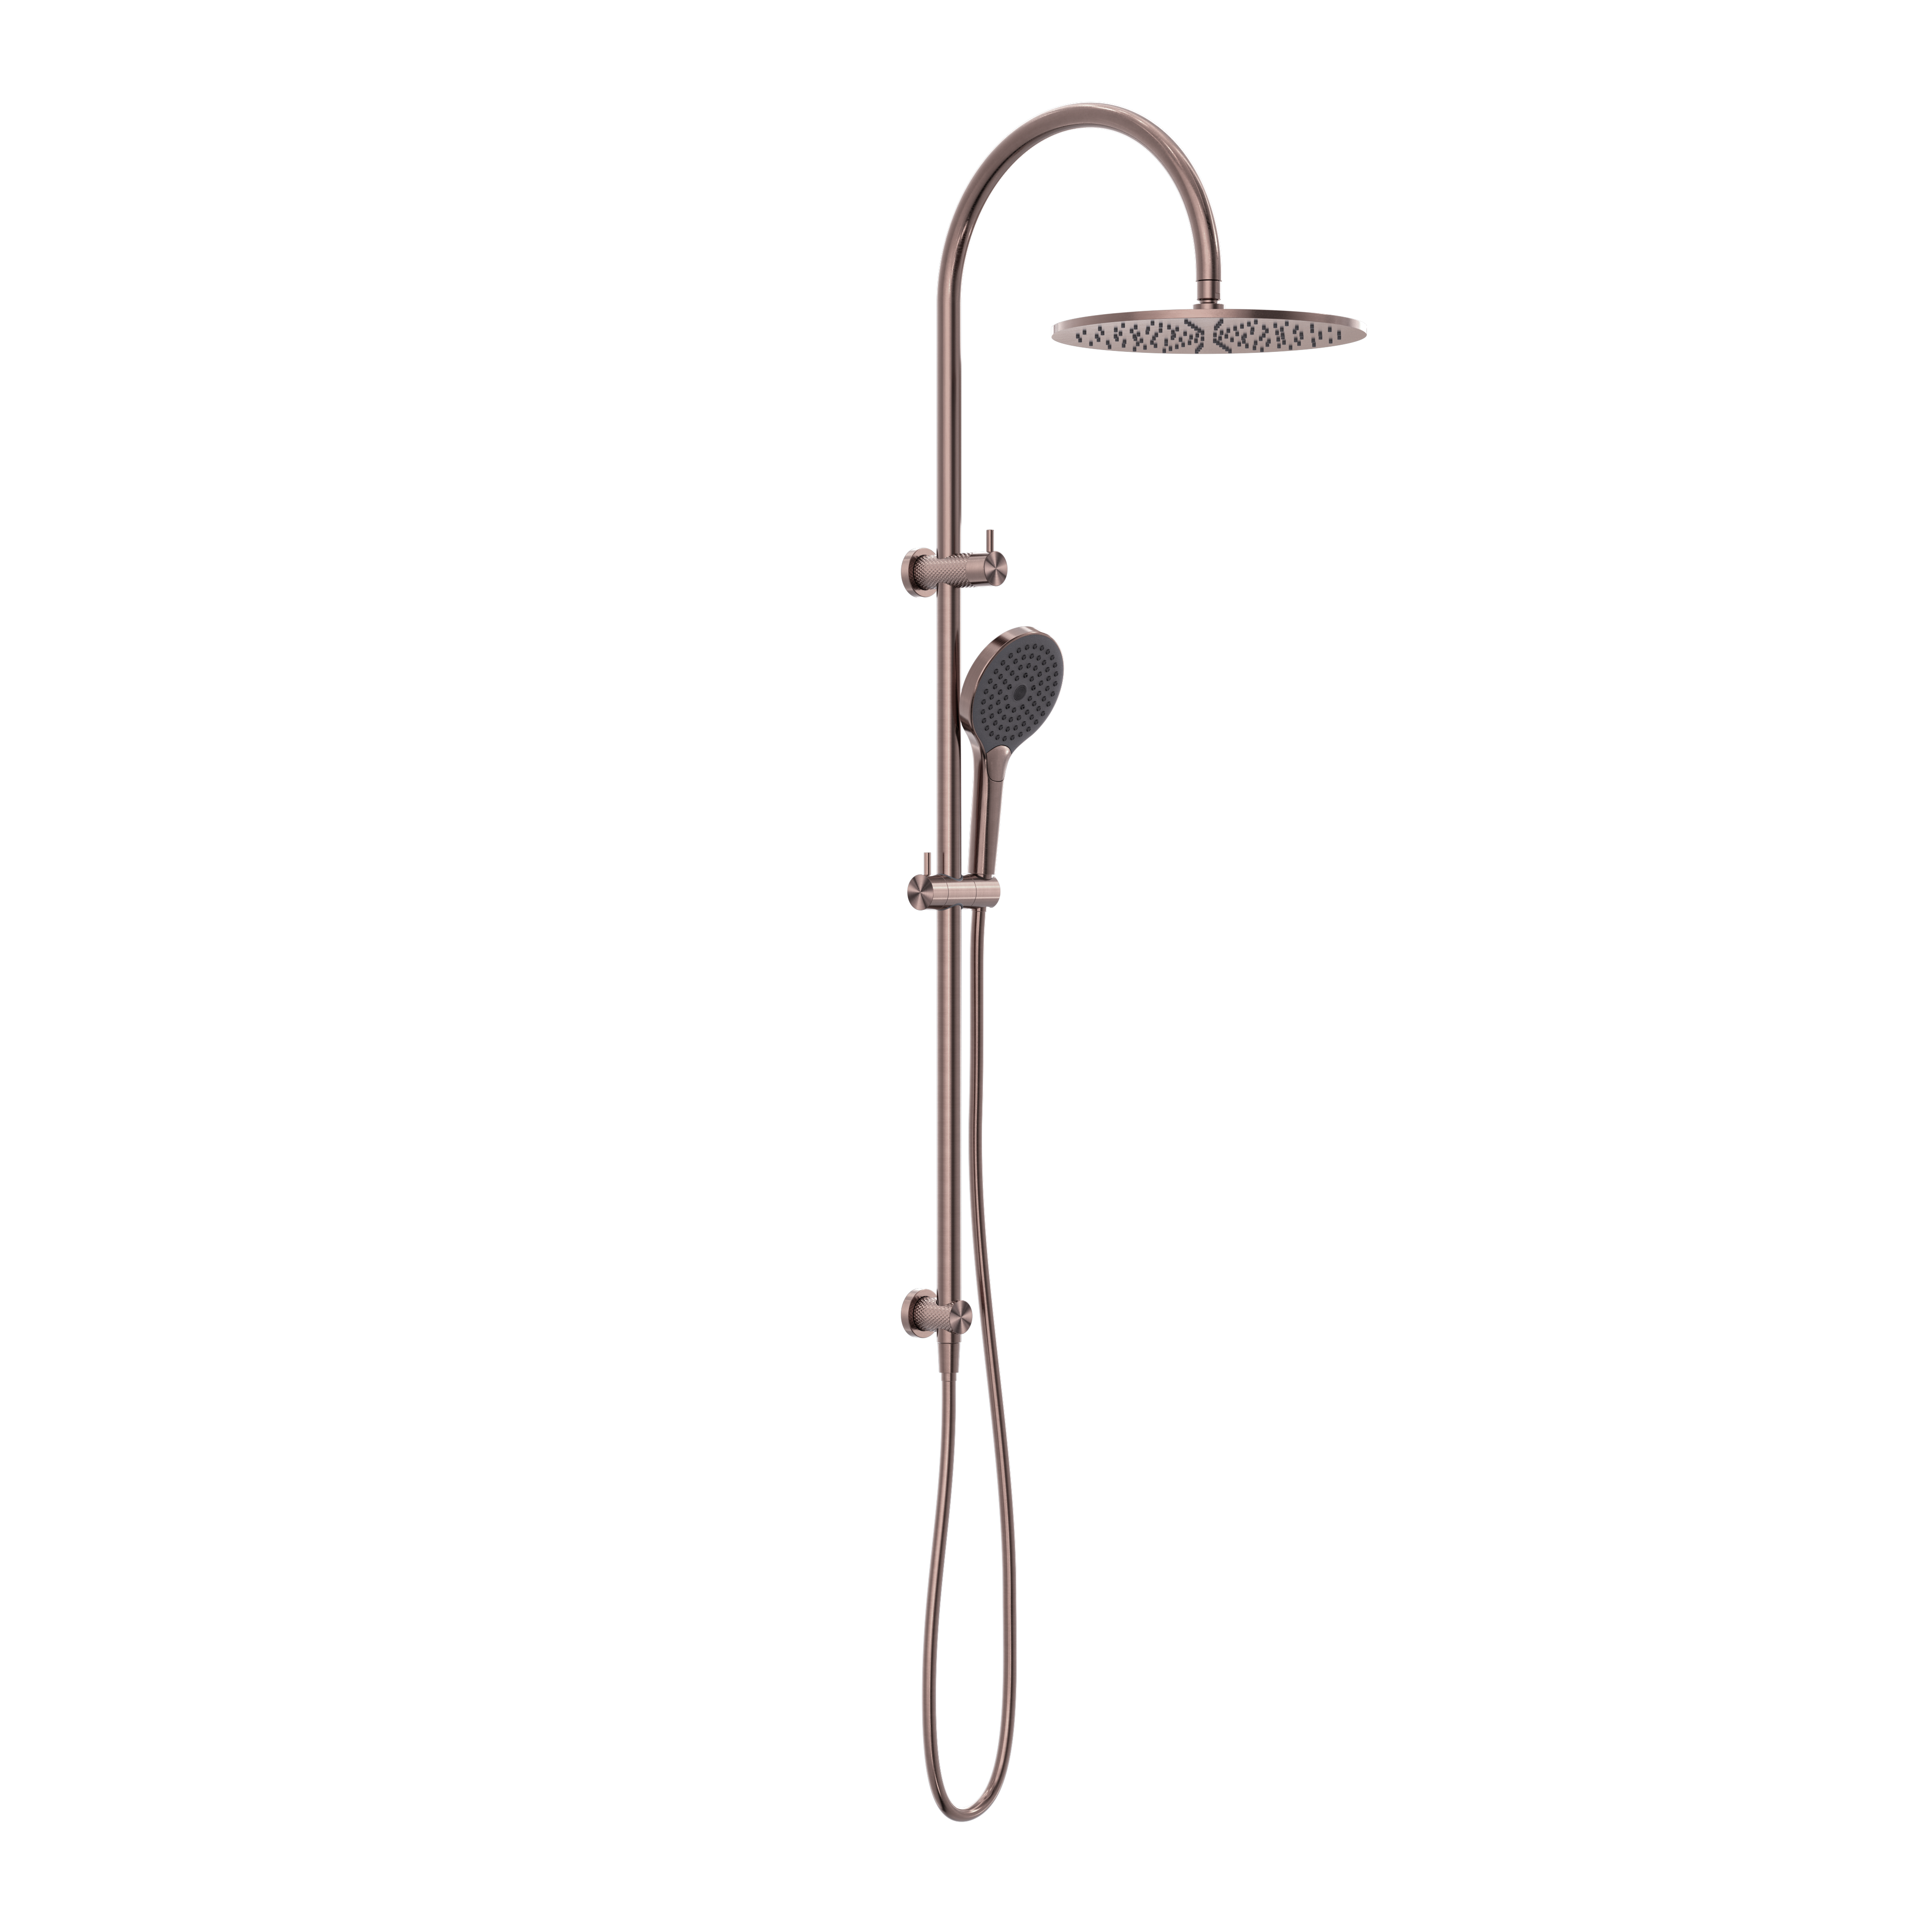 NERO OPAL TWIN SHOWER WITH AIR SHOWER II BRUSHED BRONZE